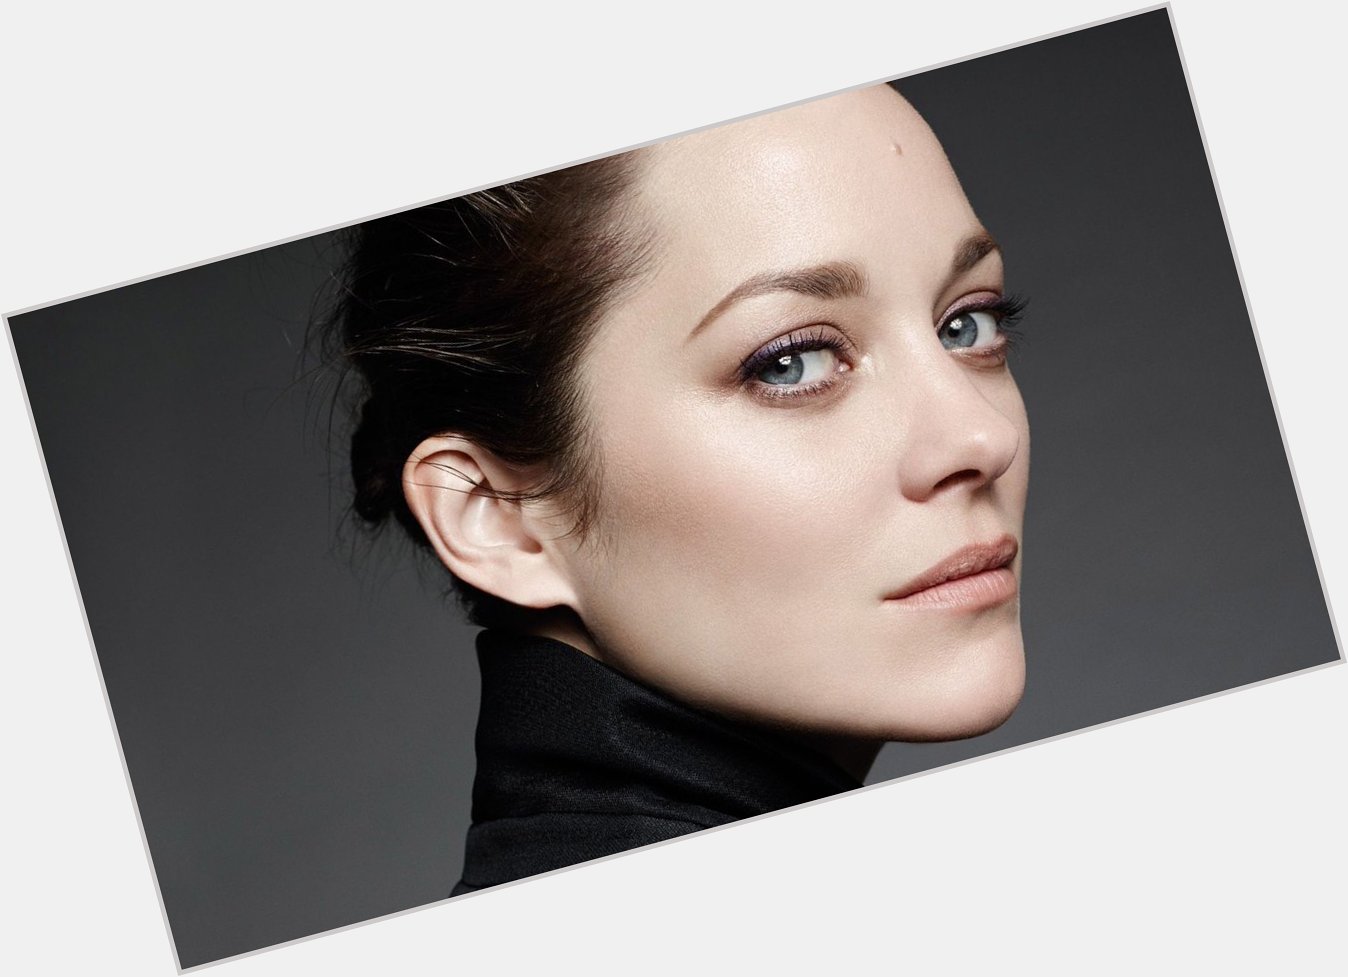    We wish a very happy birthday to the amazing Marion Cotillard! 